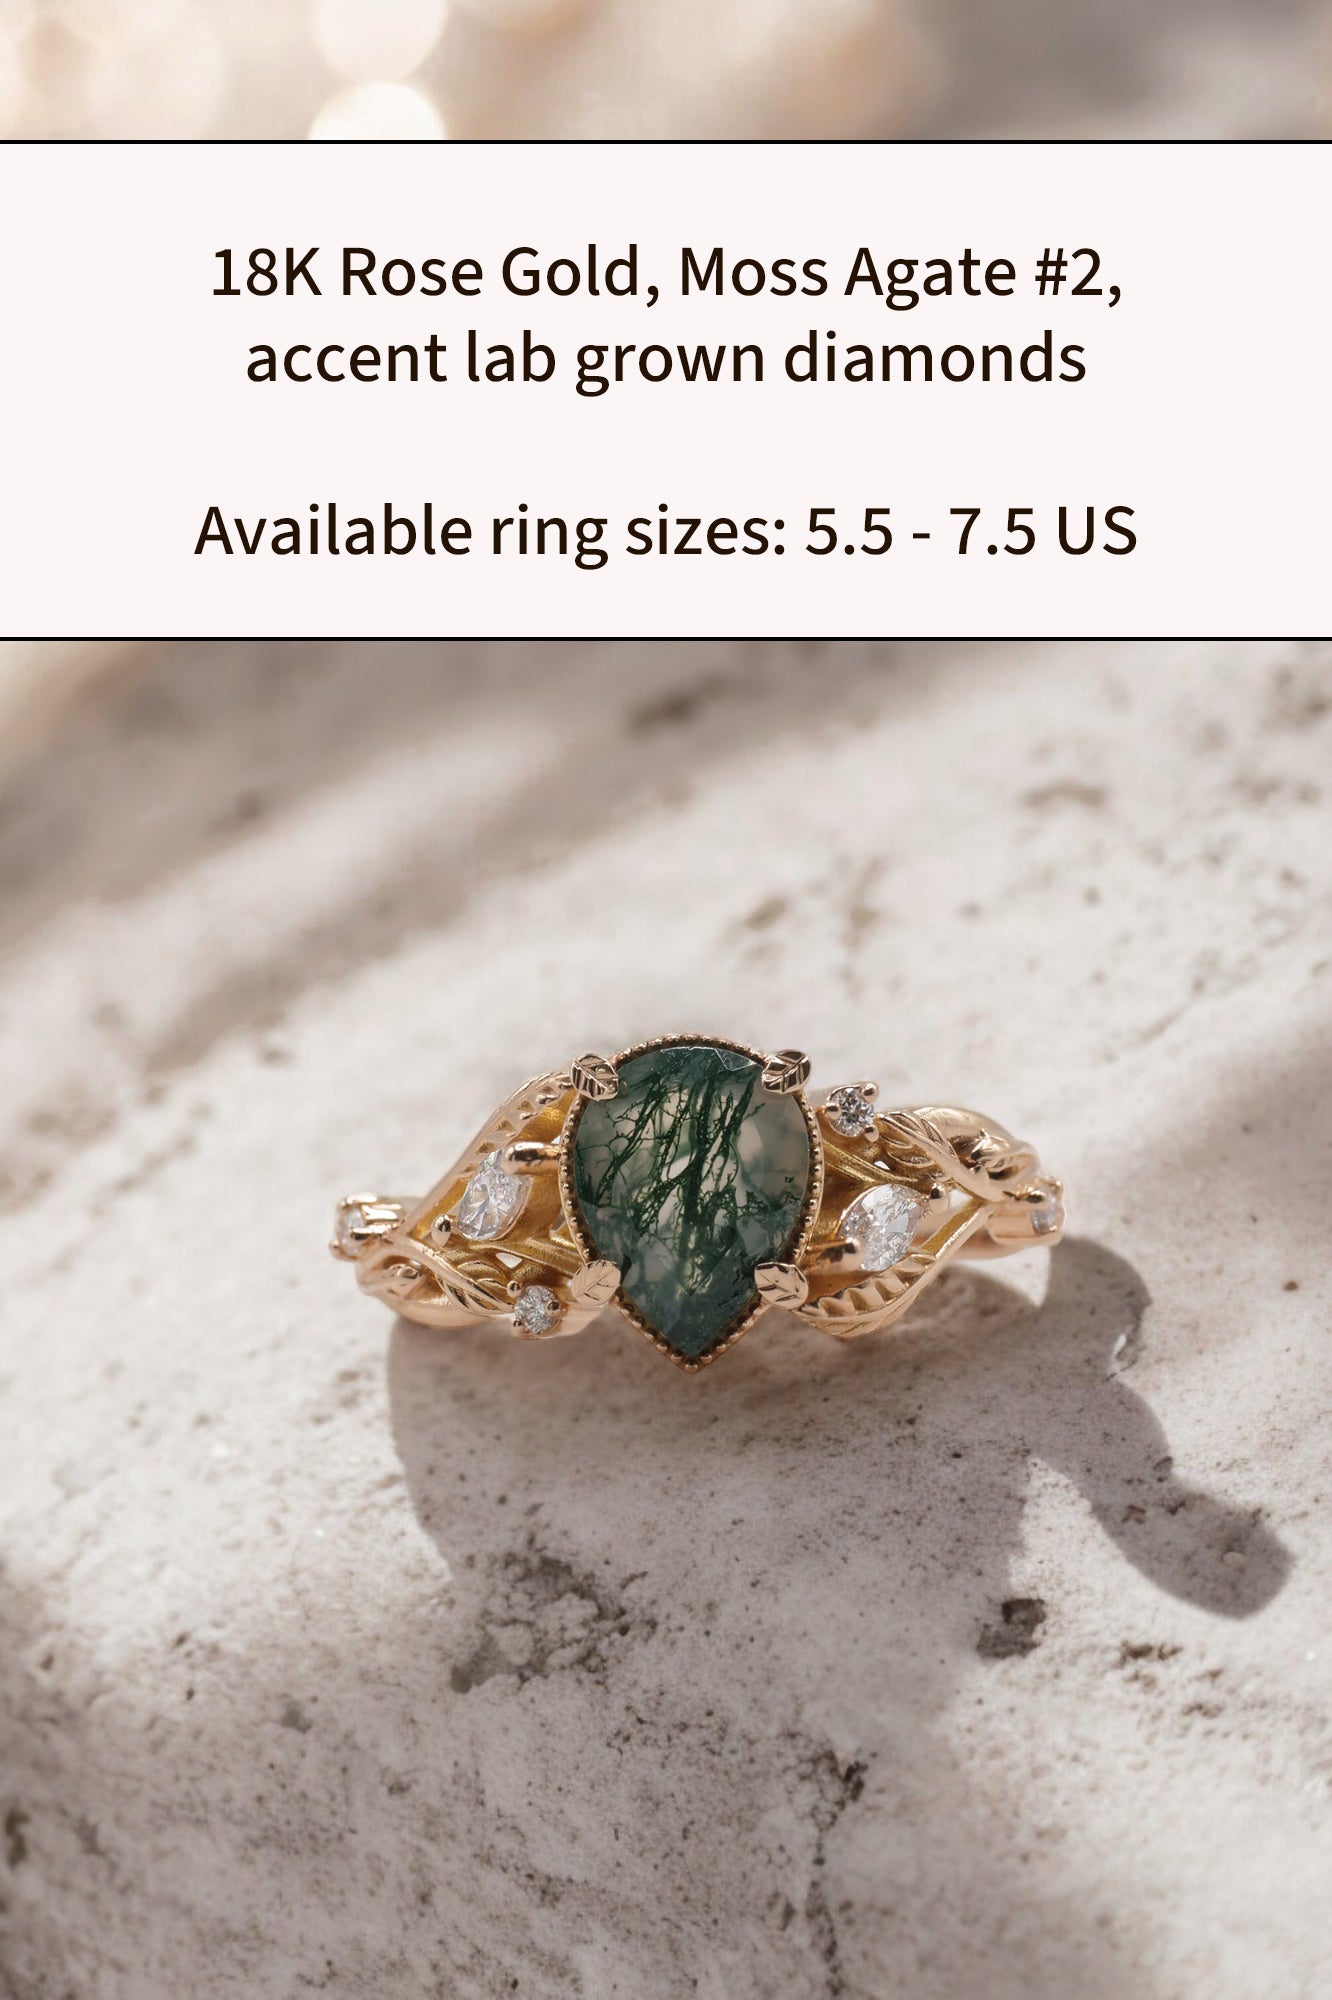 READY TO SHIP: Patricia ring in 14K or 18K rose gold, natural moss agate pear cut 8x6 mm, accent lab grown diamonds, AVAILABLE RING SIZES: 4.5-10 US